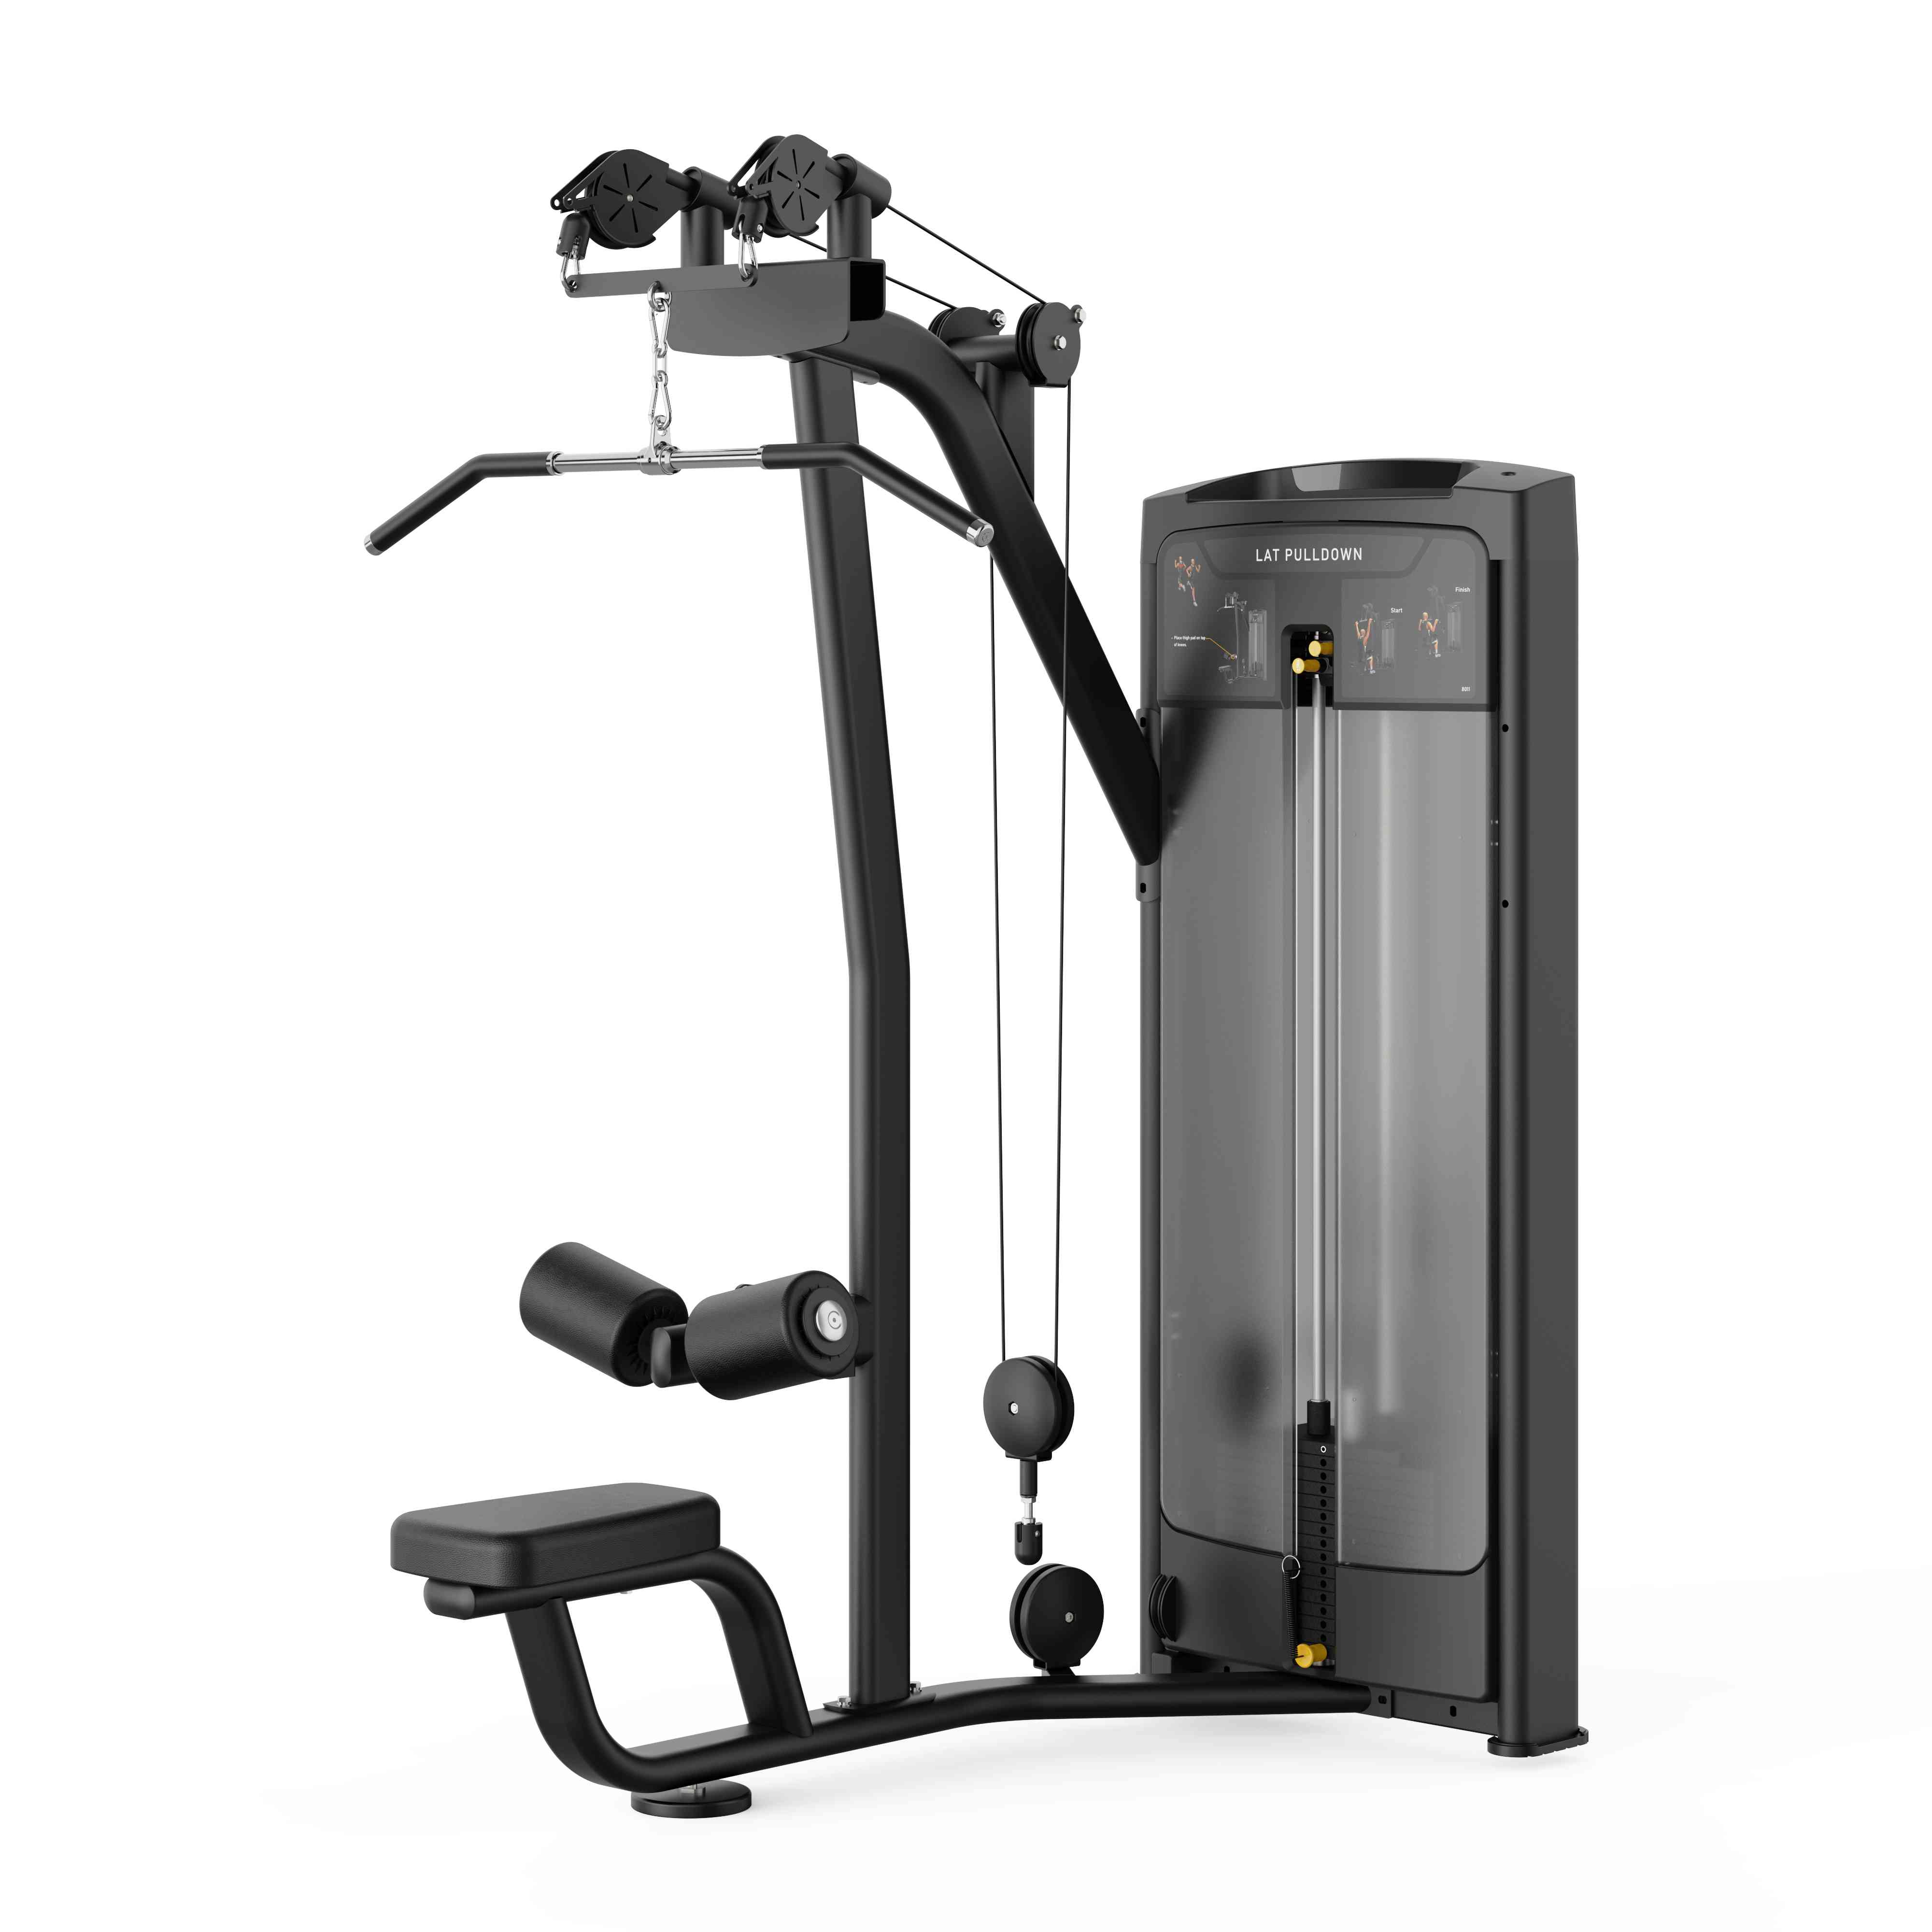 Insight Fitness Re Series Lat Pulldown RE8011